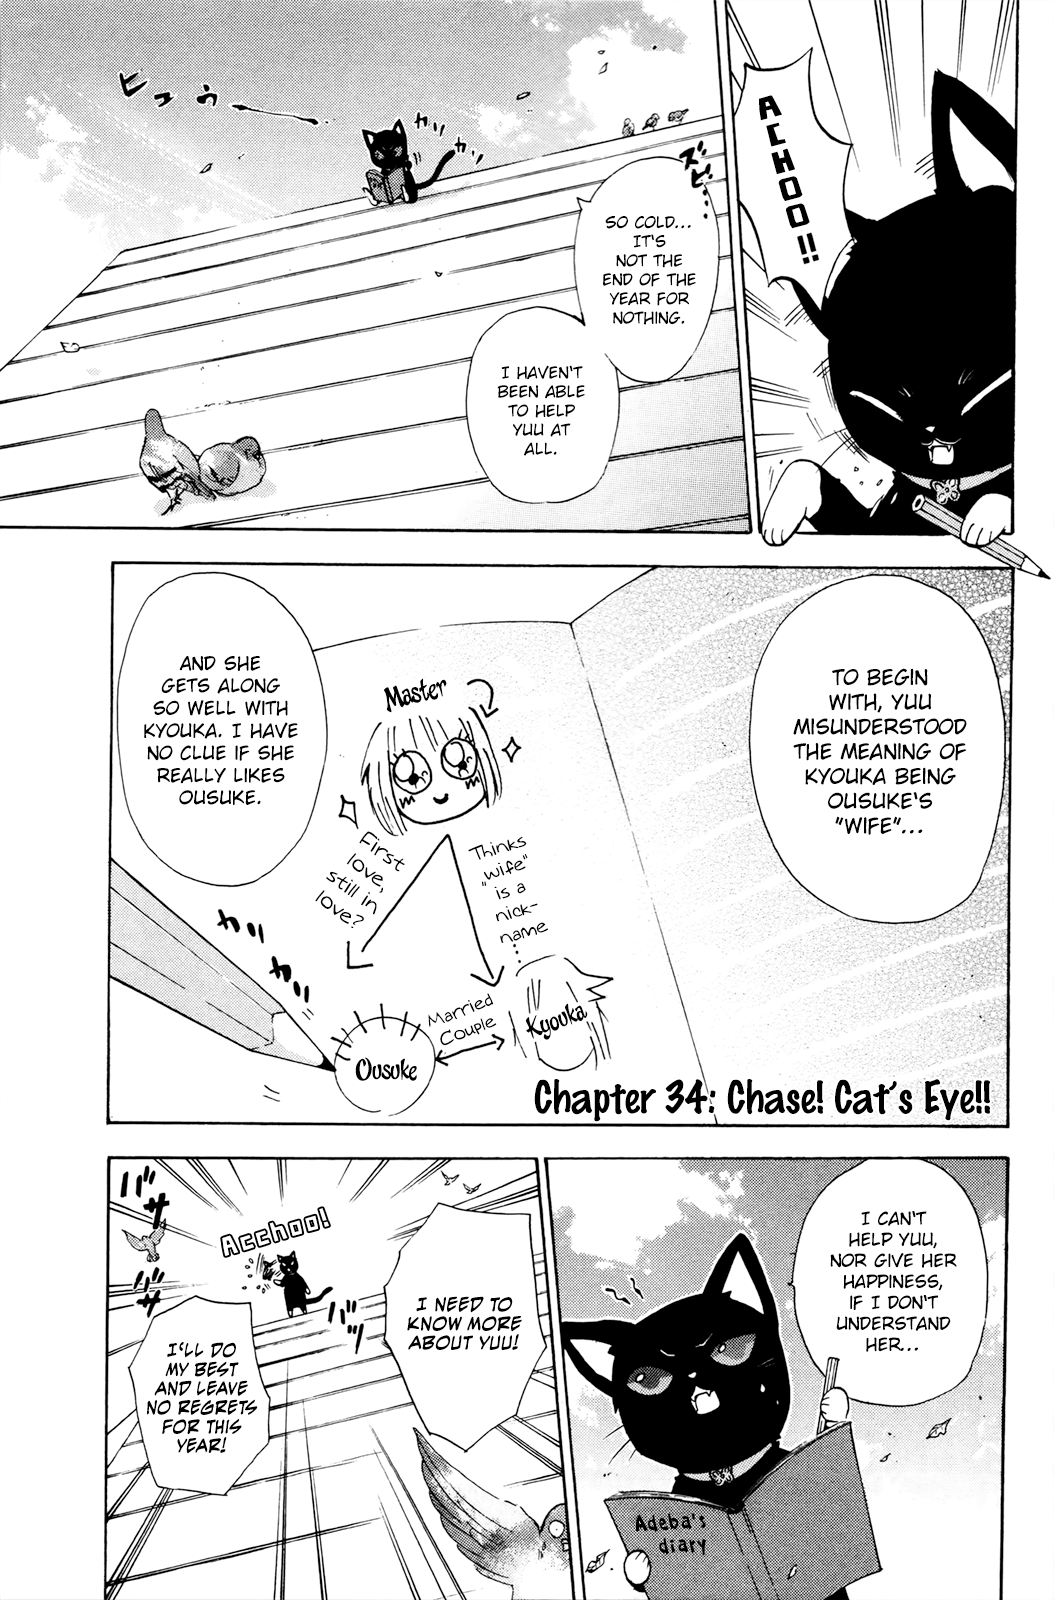 Kitsune No Yomeiri Vol.6 Chapter 34: Chase! Cat's Eye!! - Picture 3